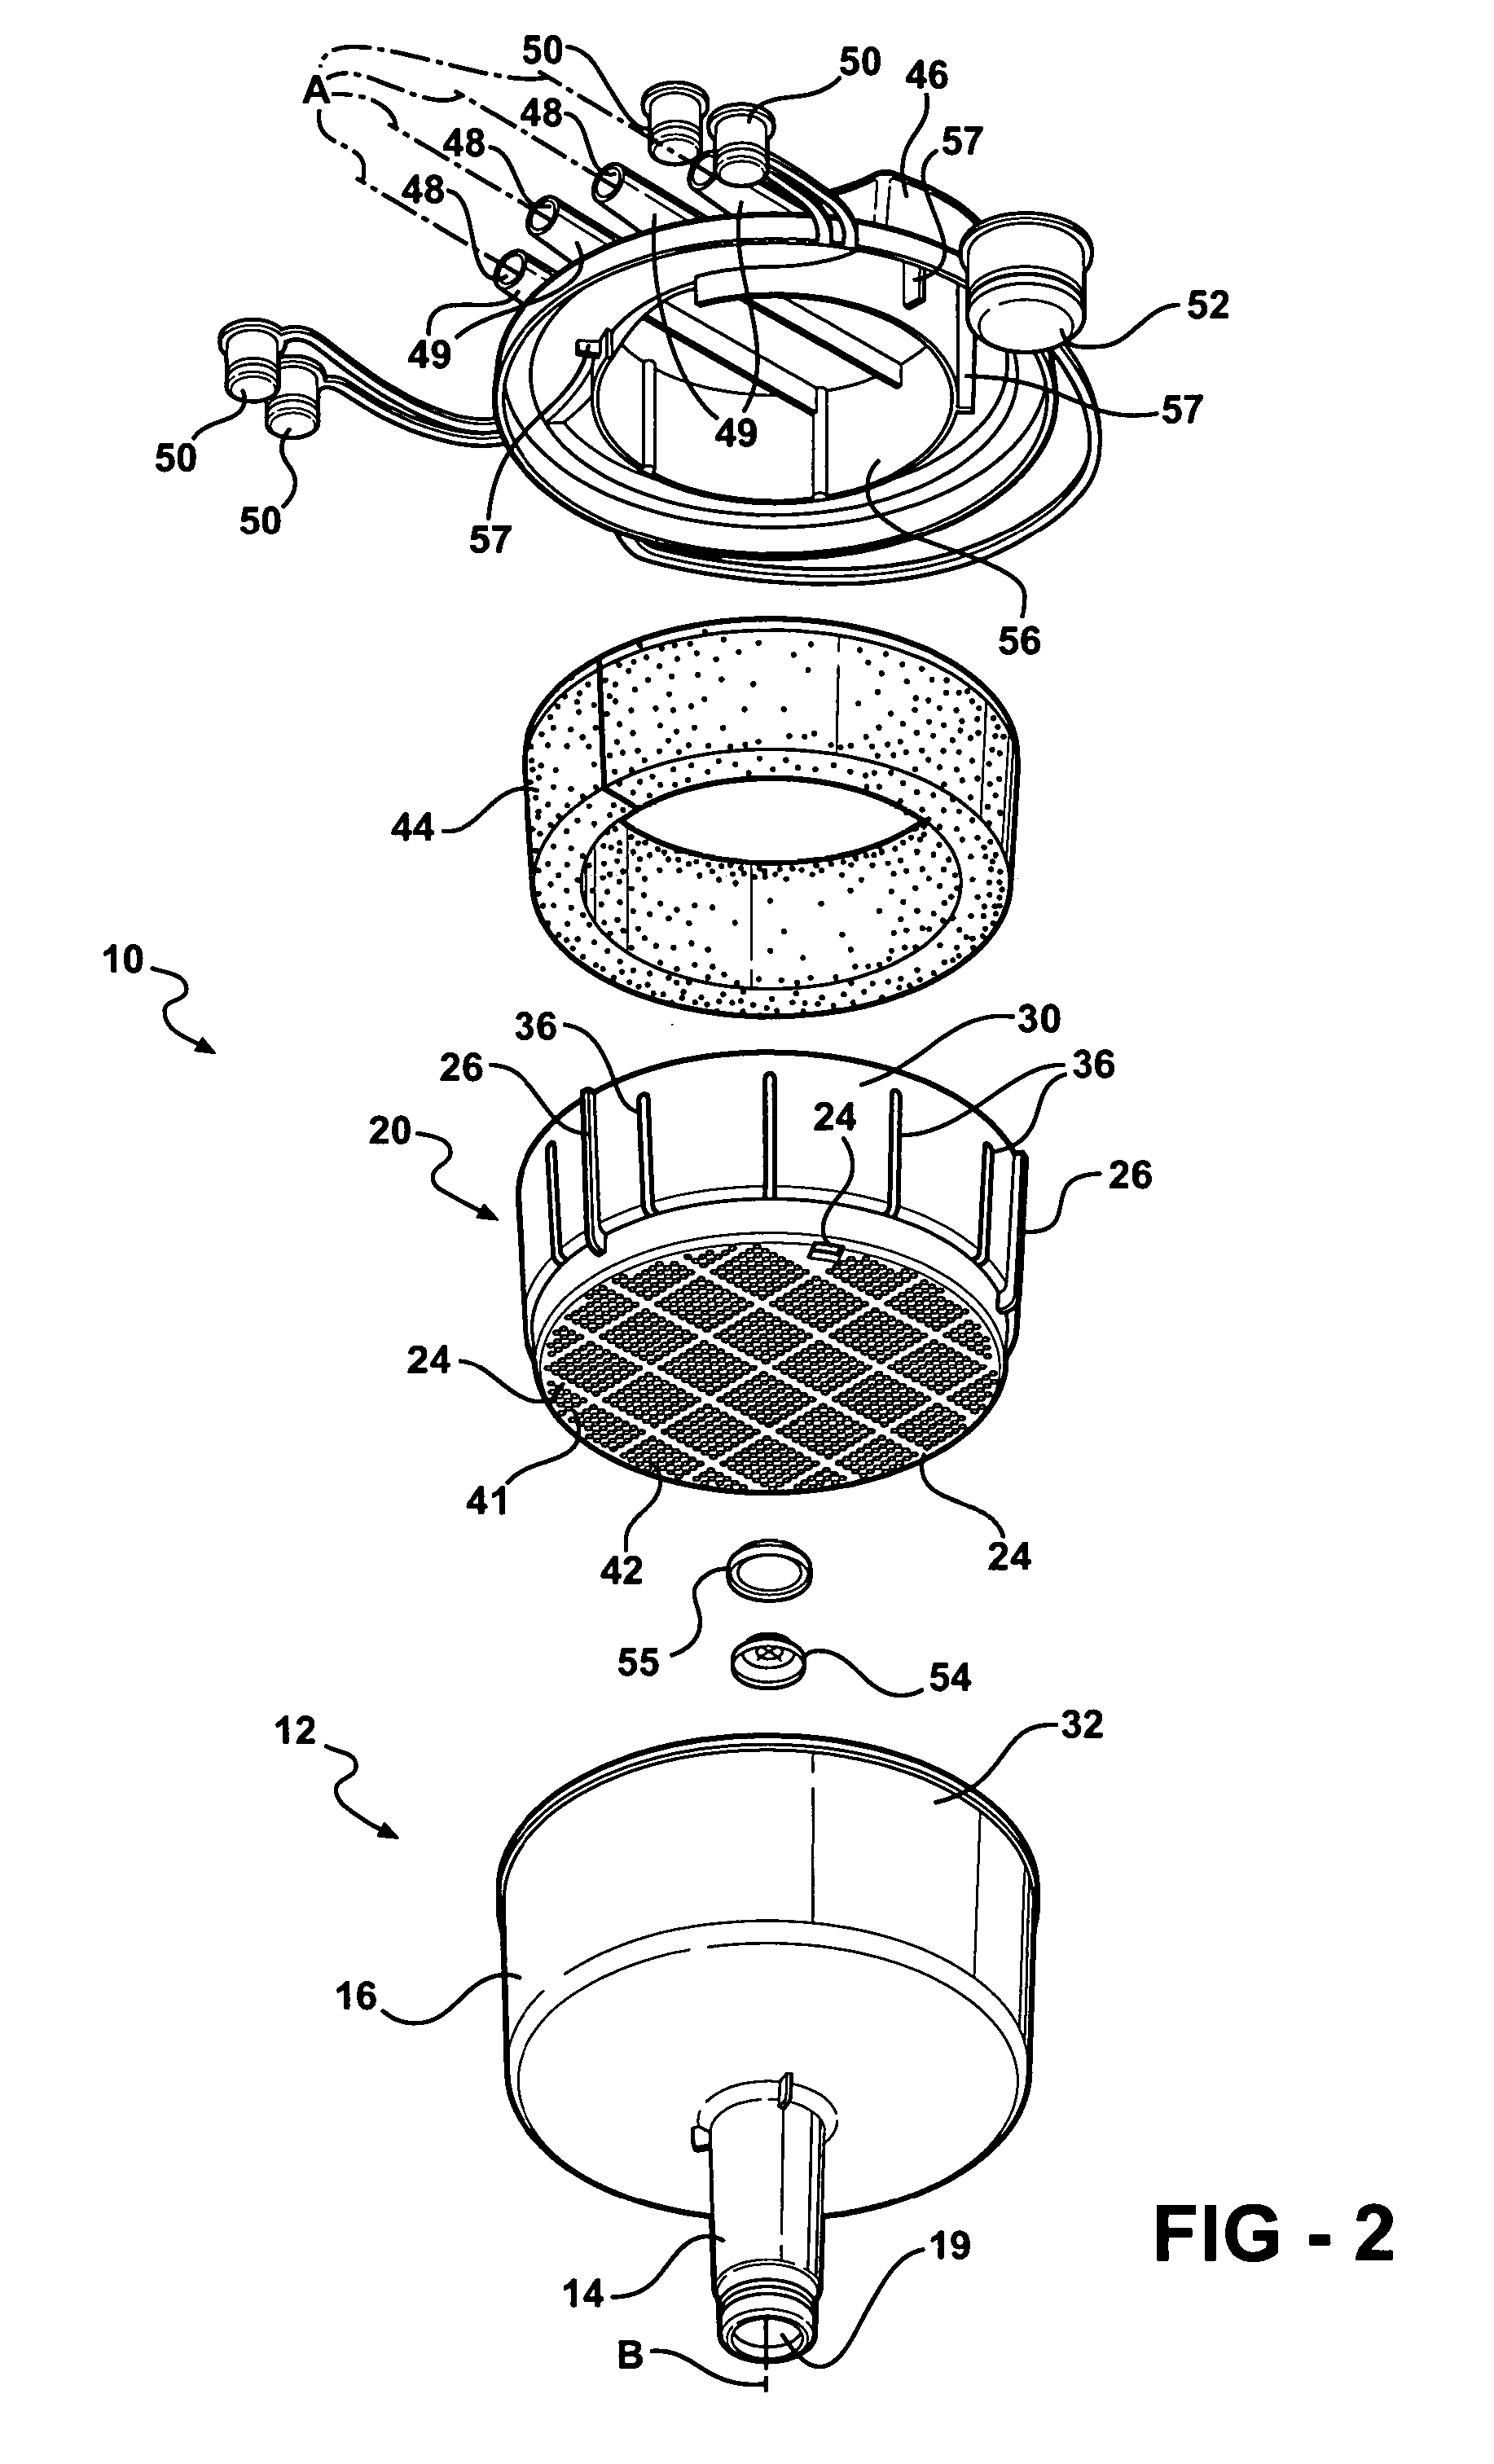 Manifold and filter assembly with filter basket